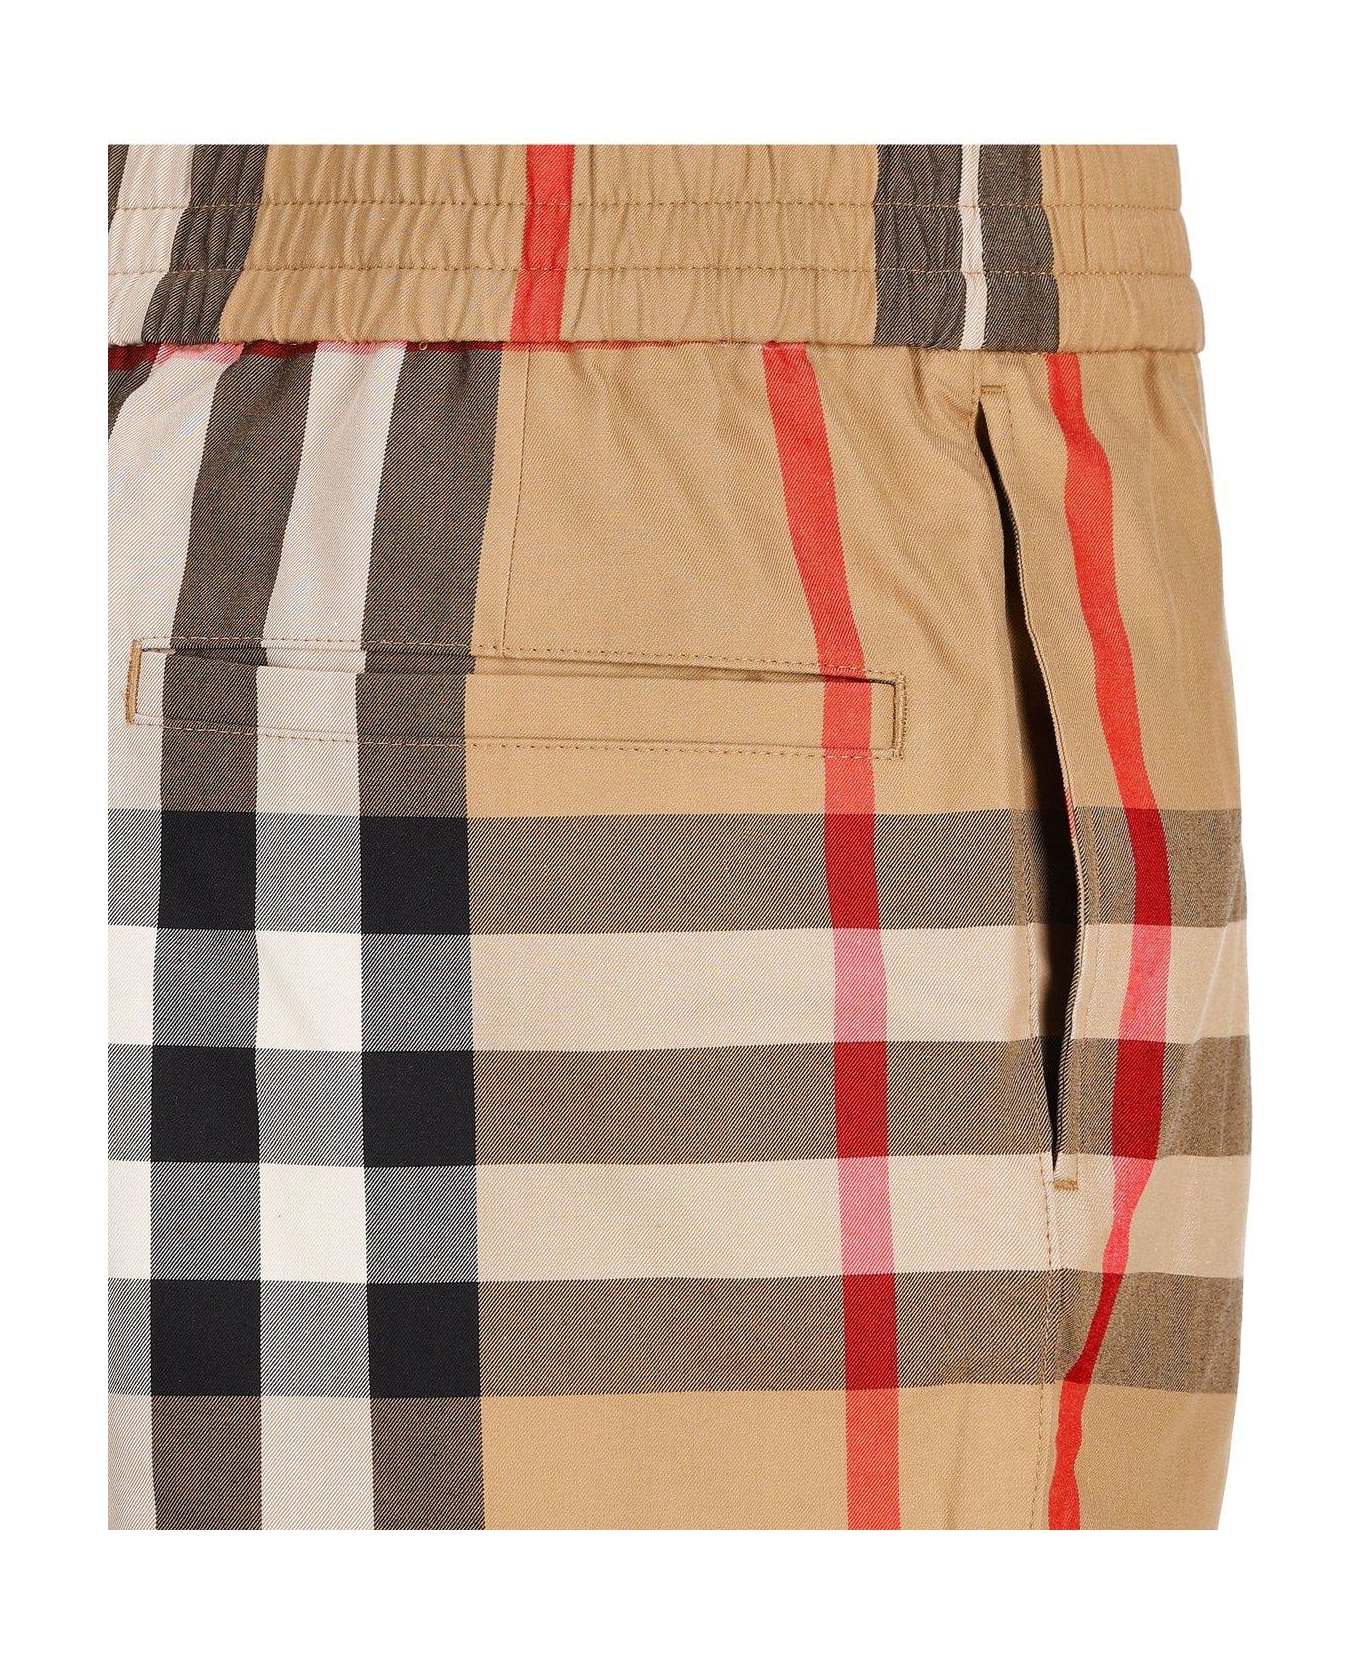 Burberry Checked Shorts - Archive beige ip chk ボトムス